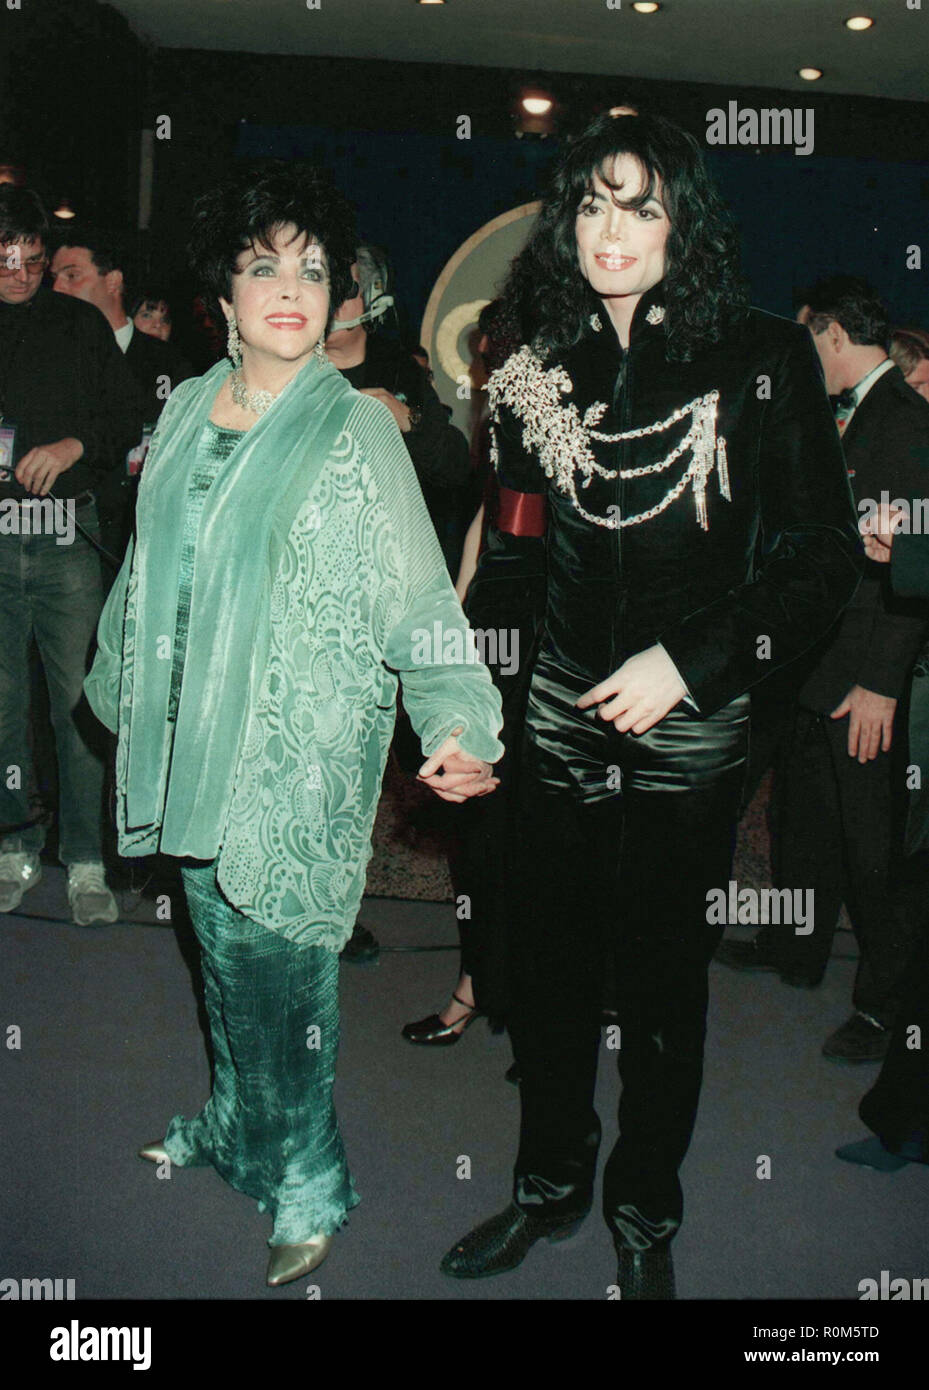 Michael jackson and Elizabeth taylor ÉÉ.. Event in Hollywood Life - California, USA, Film Industry, Celebrities, Photography, Bestof, Arts Culture and Entertainment, Topix Celebrities fashion, Best of, Hollywood Life,  Red Carpet and backstage, movie celebrities, TV celebrities, Music celebrities, Topix, Bestof, Arts Culture and Entertainment, vertical, one person, Photography,   #Celebrity #Hollywood #RedCarpet #Actor #Actress #famousCelebrity #HollywoodEvent #TsuniUSA #CelebrityPhotography, Fashion inquiry tsuni@Gamma-USA.com , Credit Tsuni / USA,   Fashion, From the Year 1993 to 1999, Stock Photo